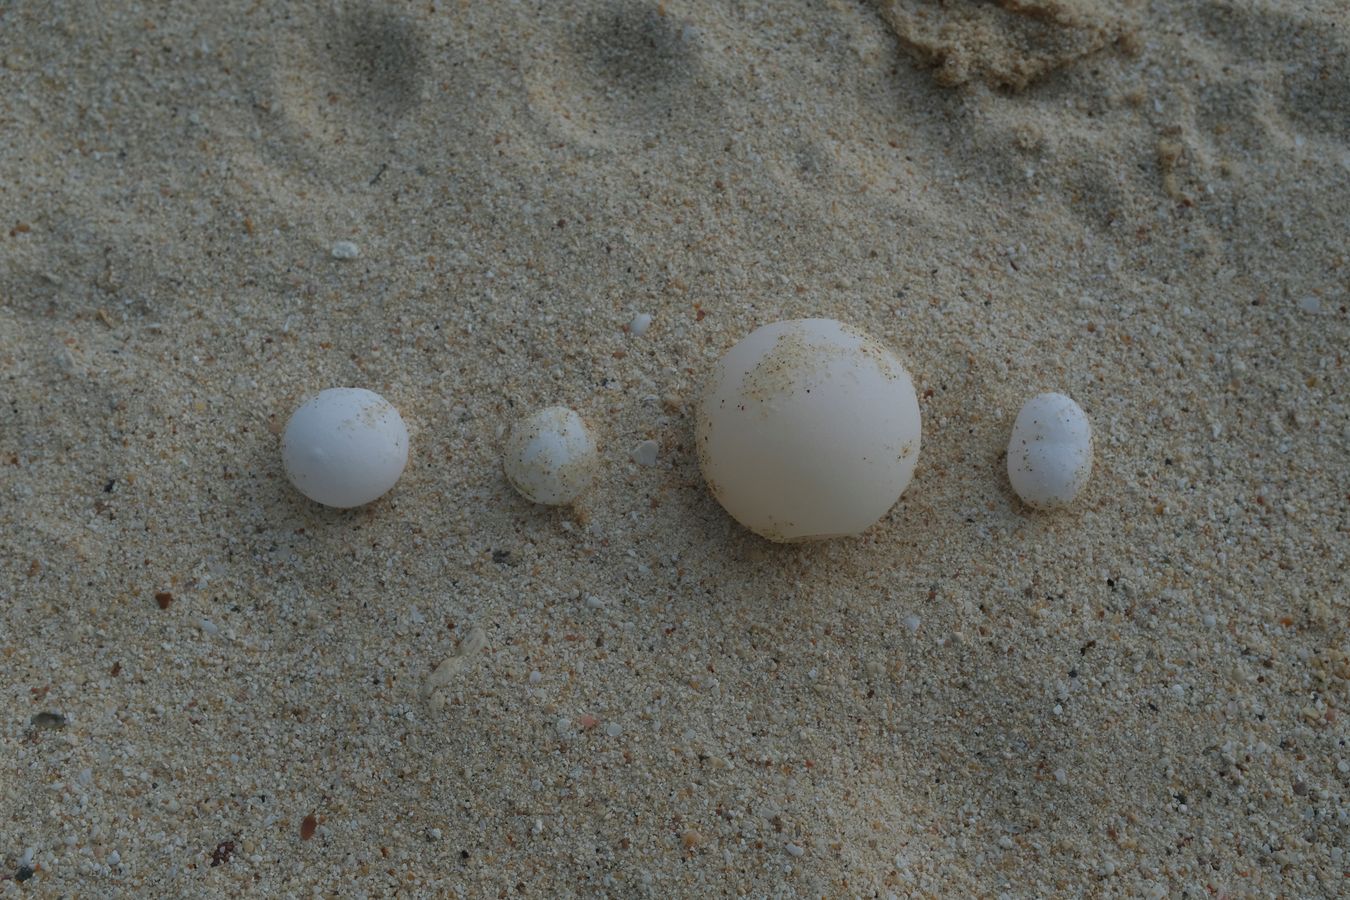 Four green turtle eggs of different sizes and shapes { only the third from the left has the normal size and shape }